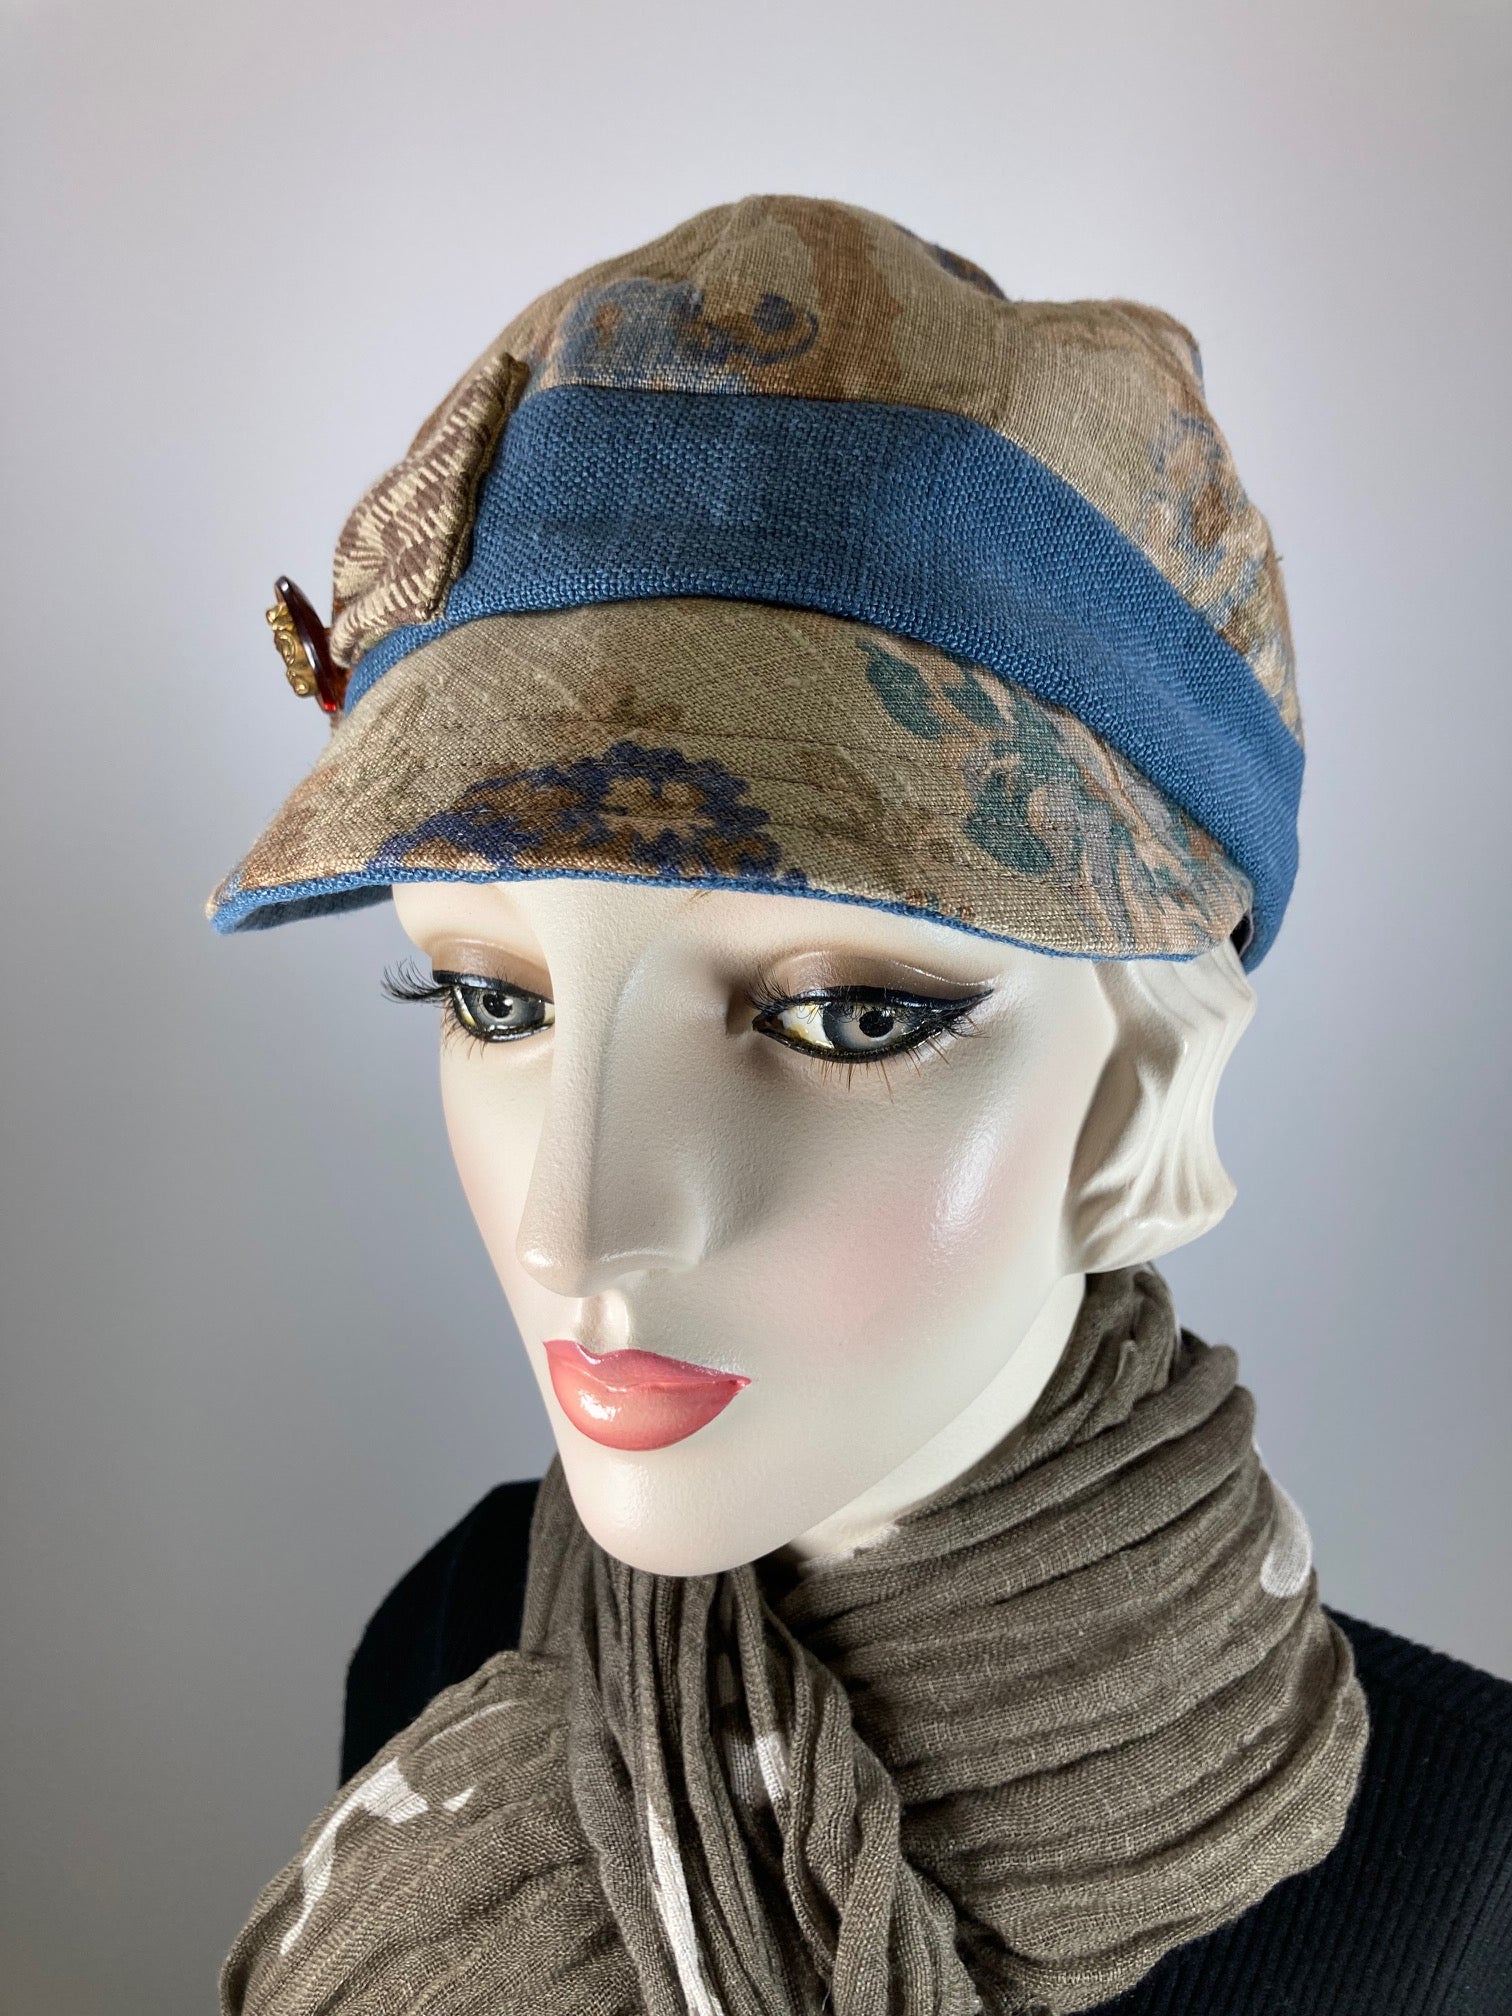 Women's Linen Newsboy Baseball Cap Baseball. Blue tan floral Cool summer casual hat. Sustainable fabric Eco friendly hat. Neutral cabby cap